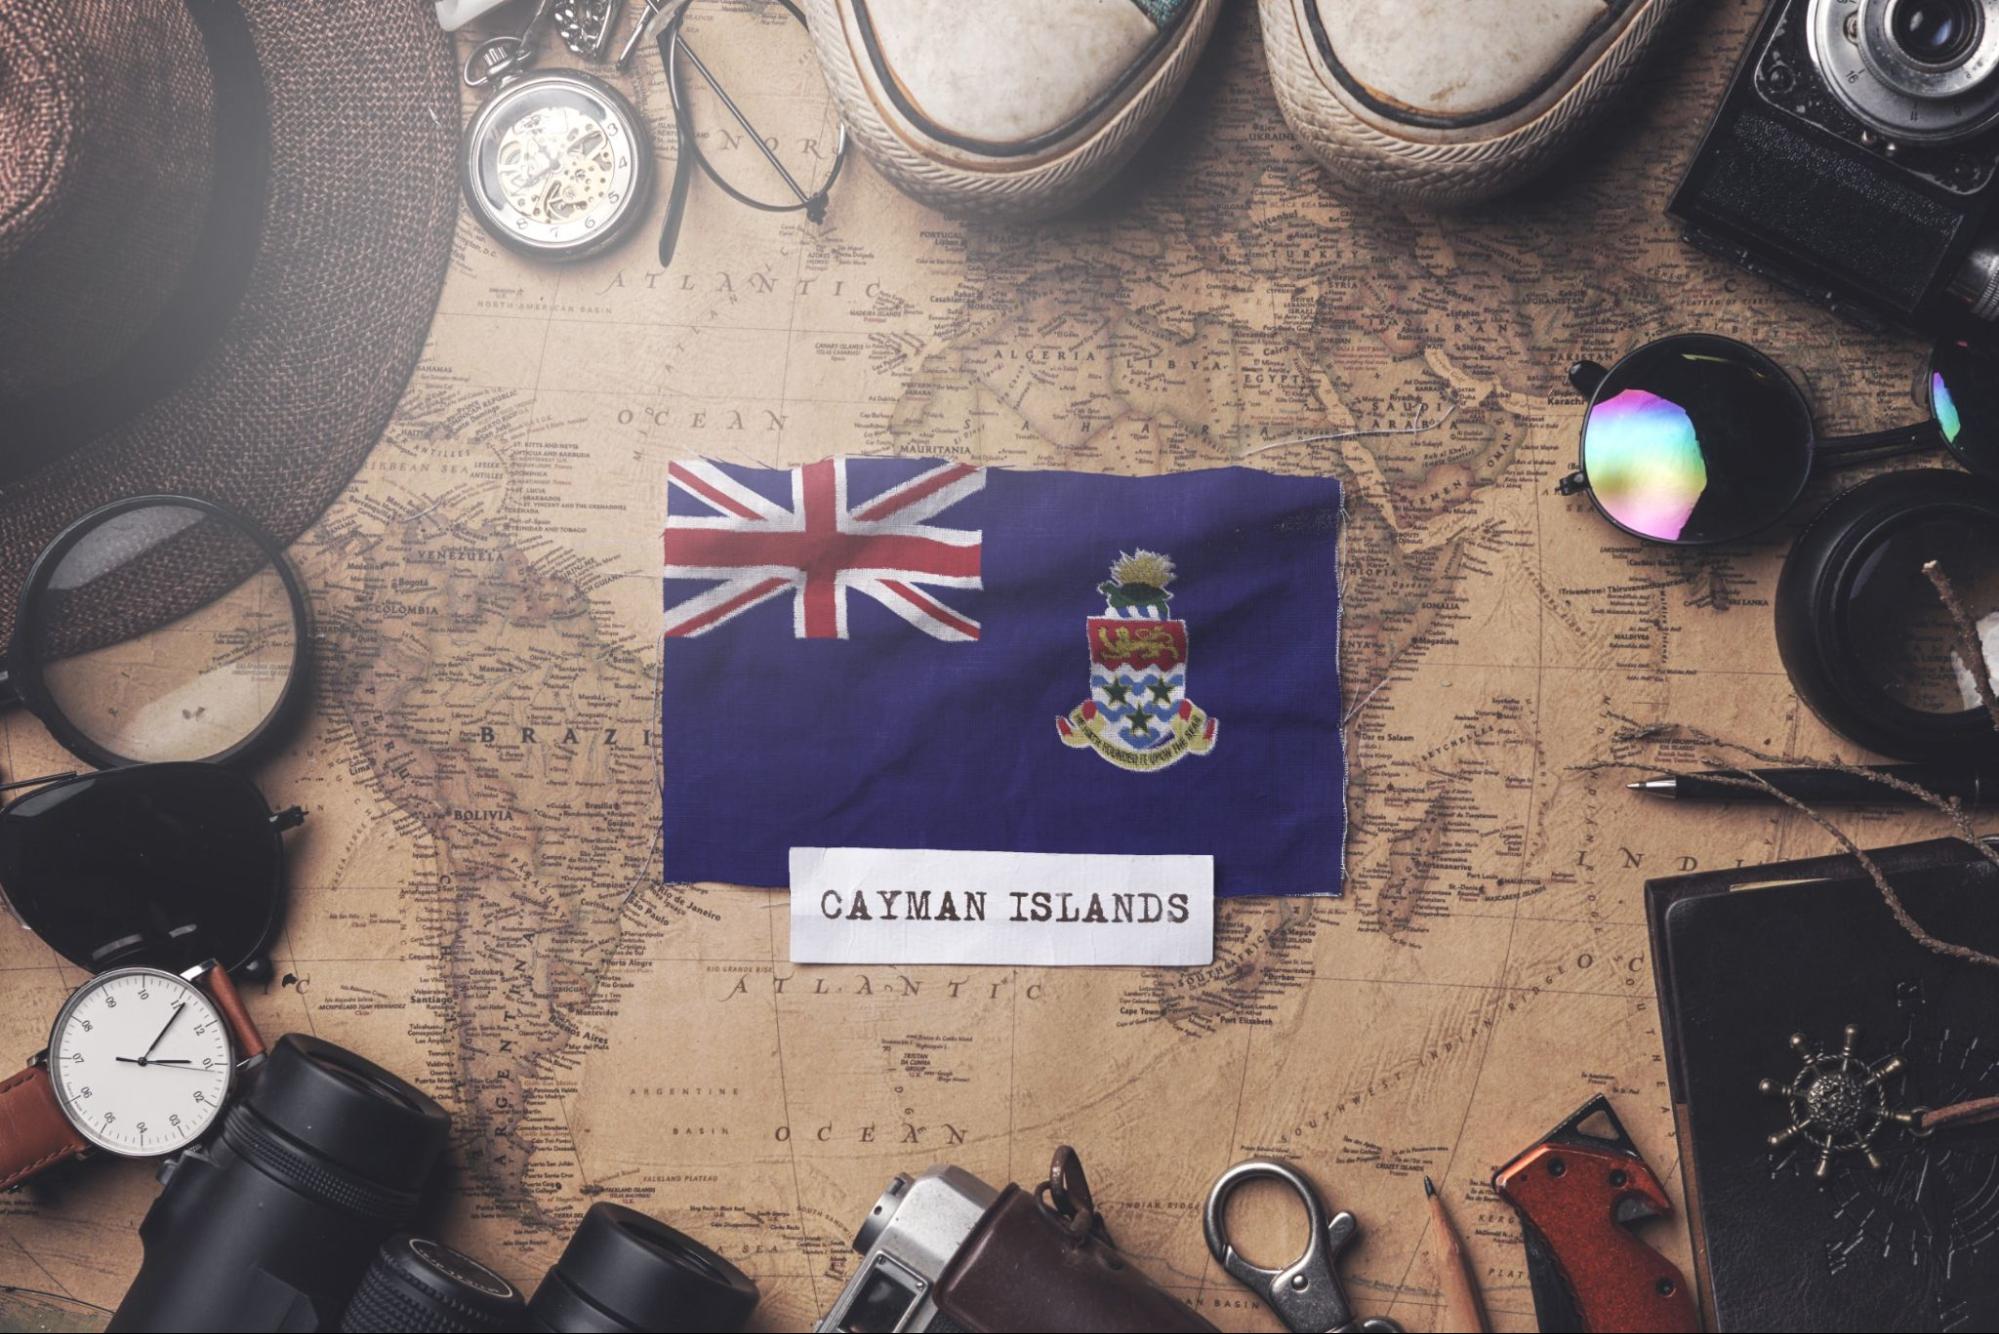 Cayman Islands Flag Between Traveler's Accessories on Old Vintage Map